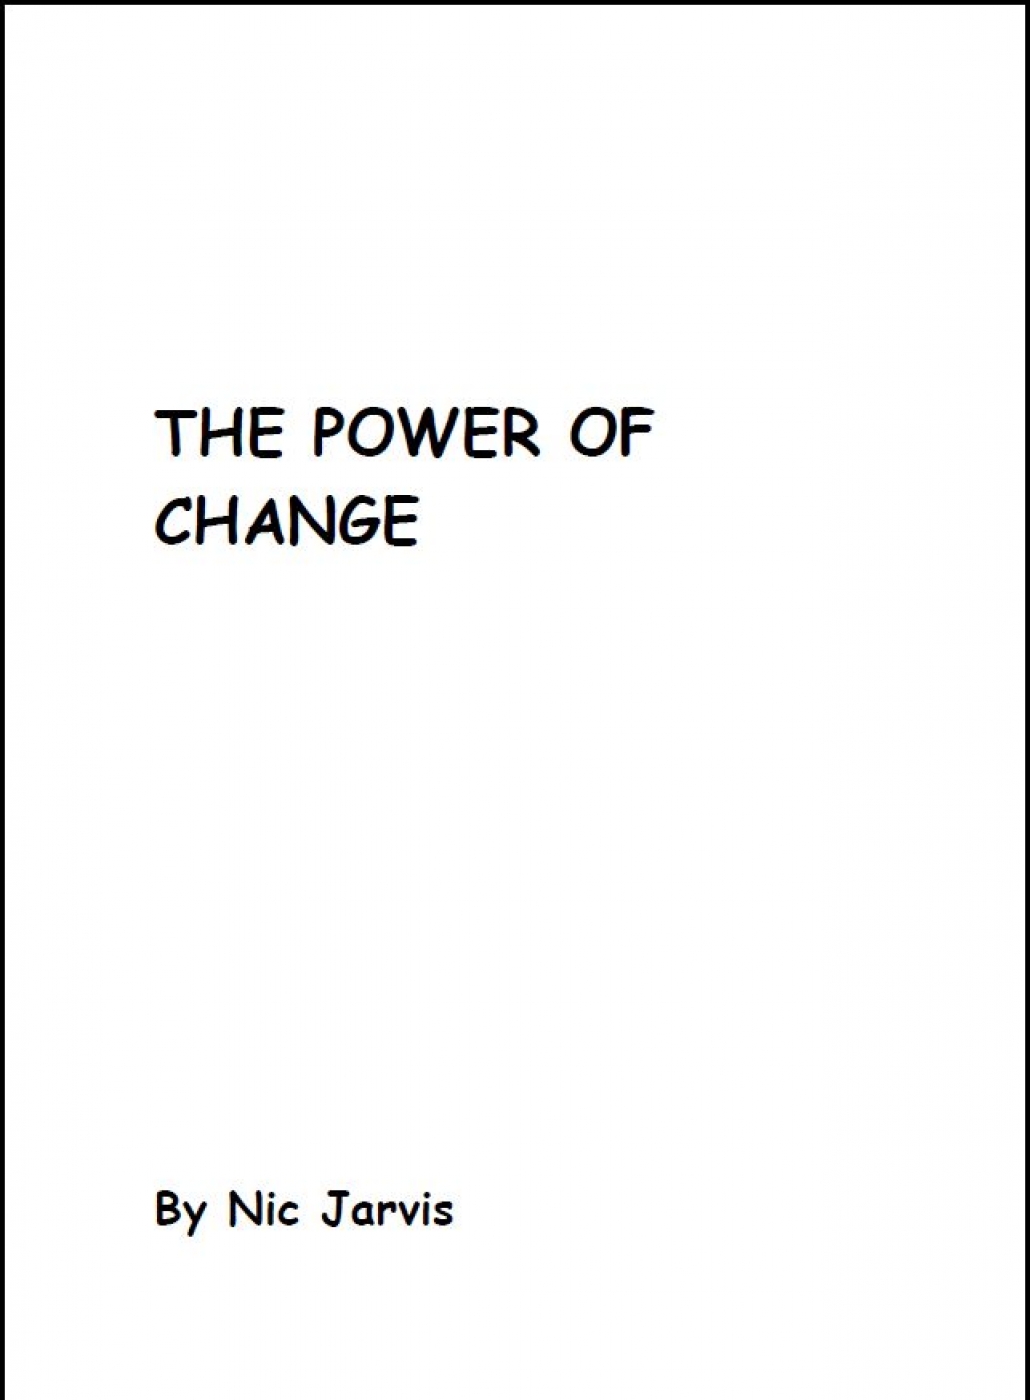 The power of change